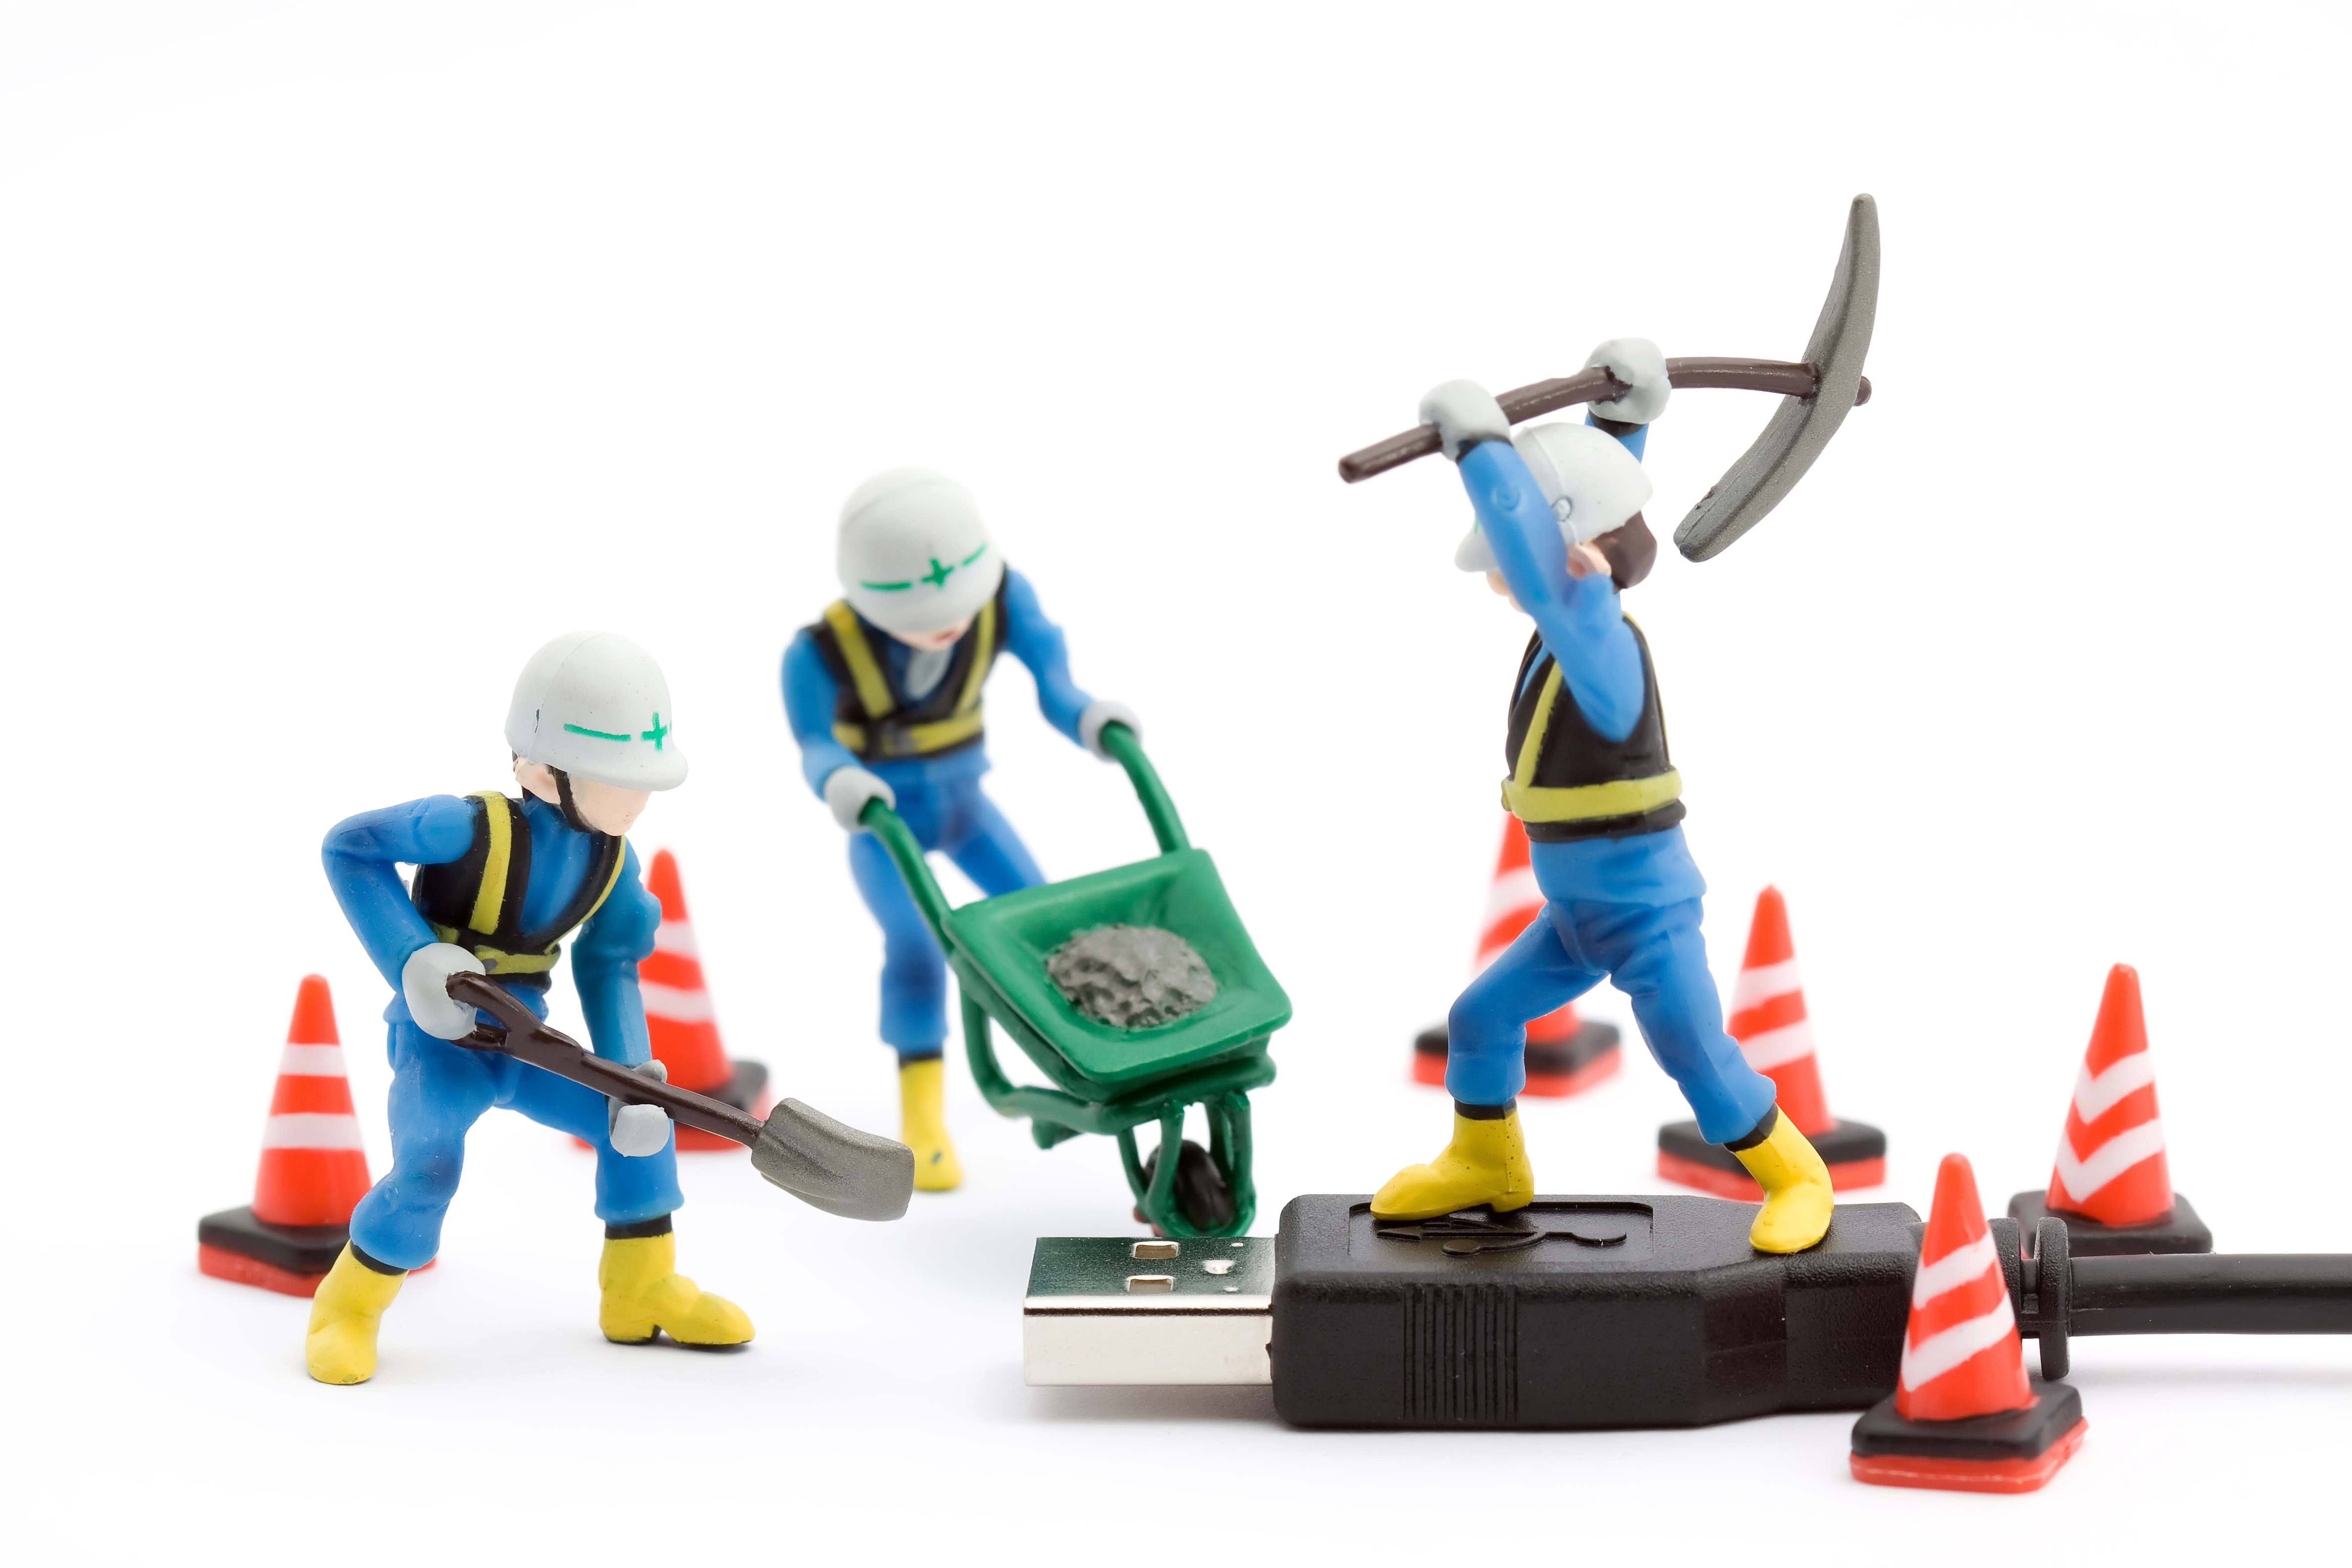 Images Of Construction Workers - ClipArt Best